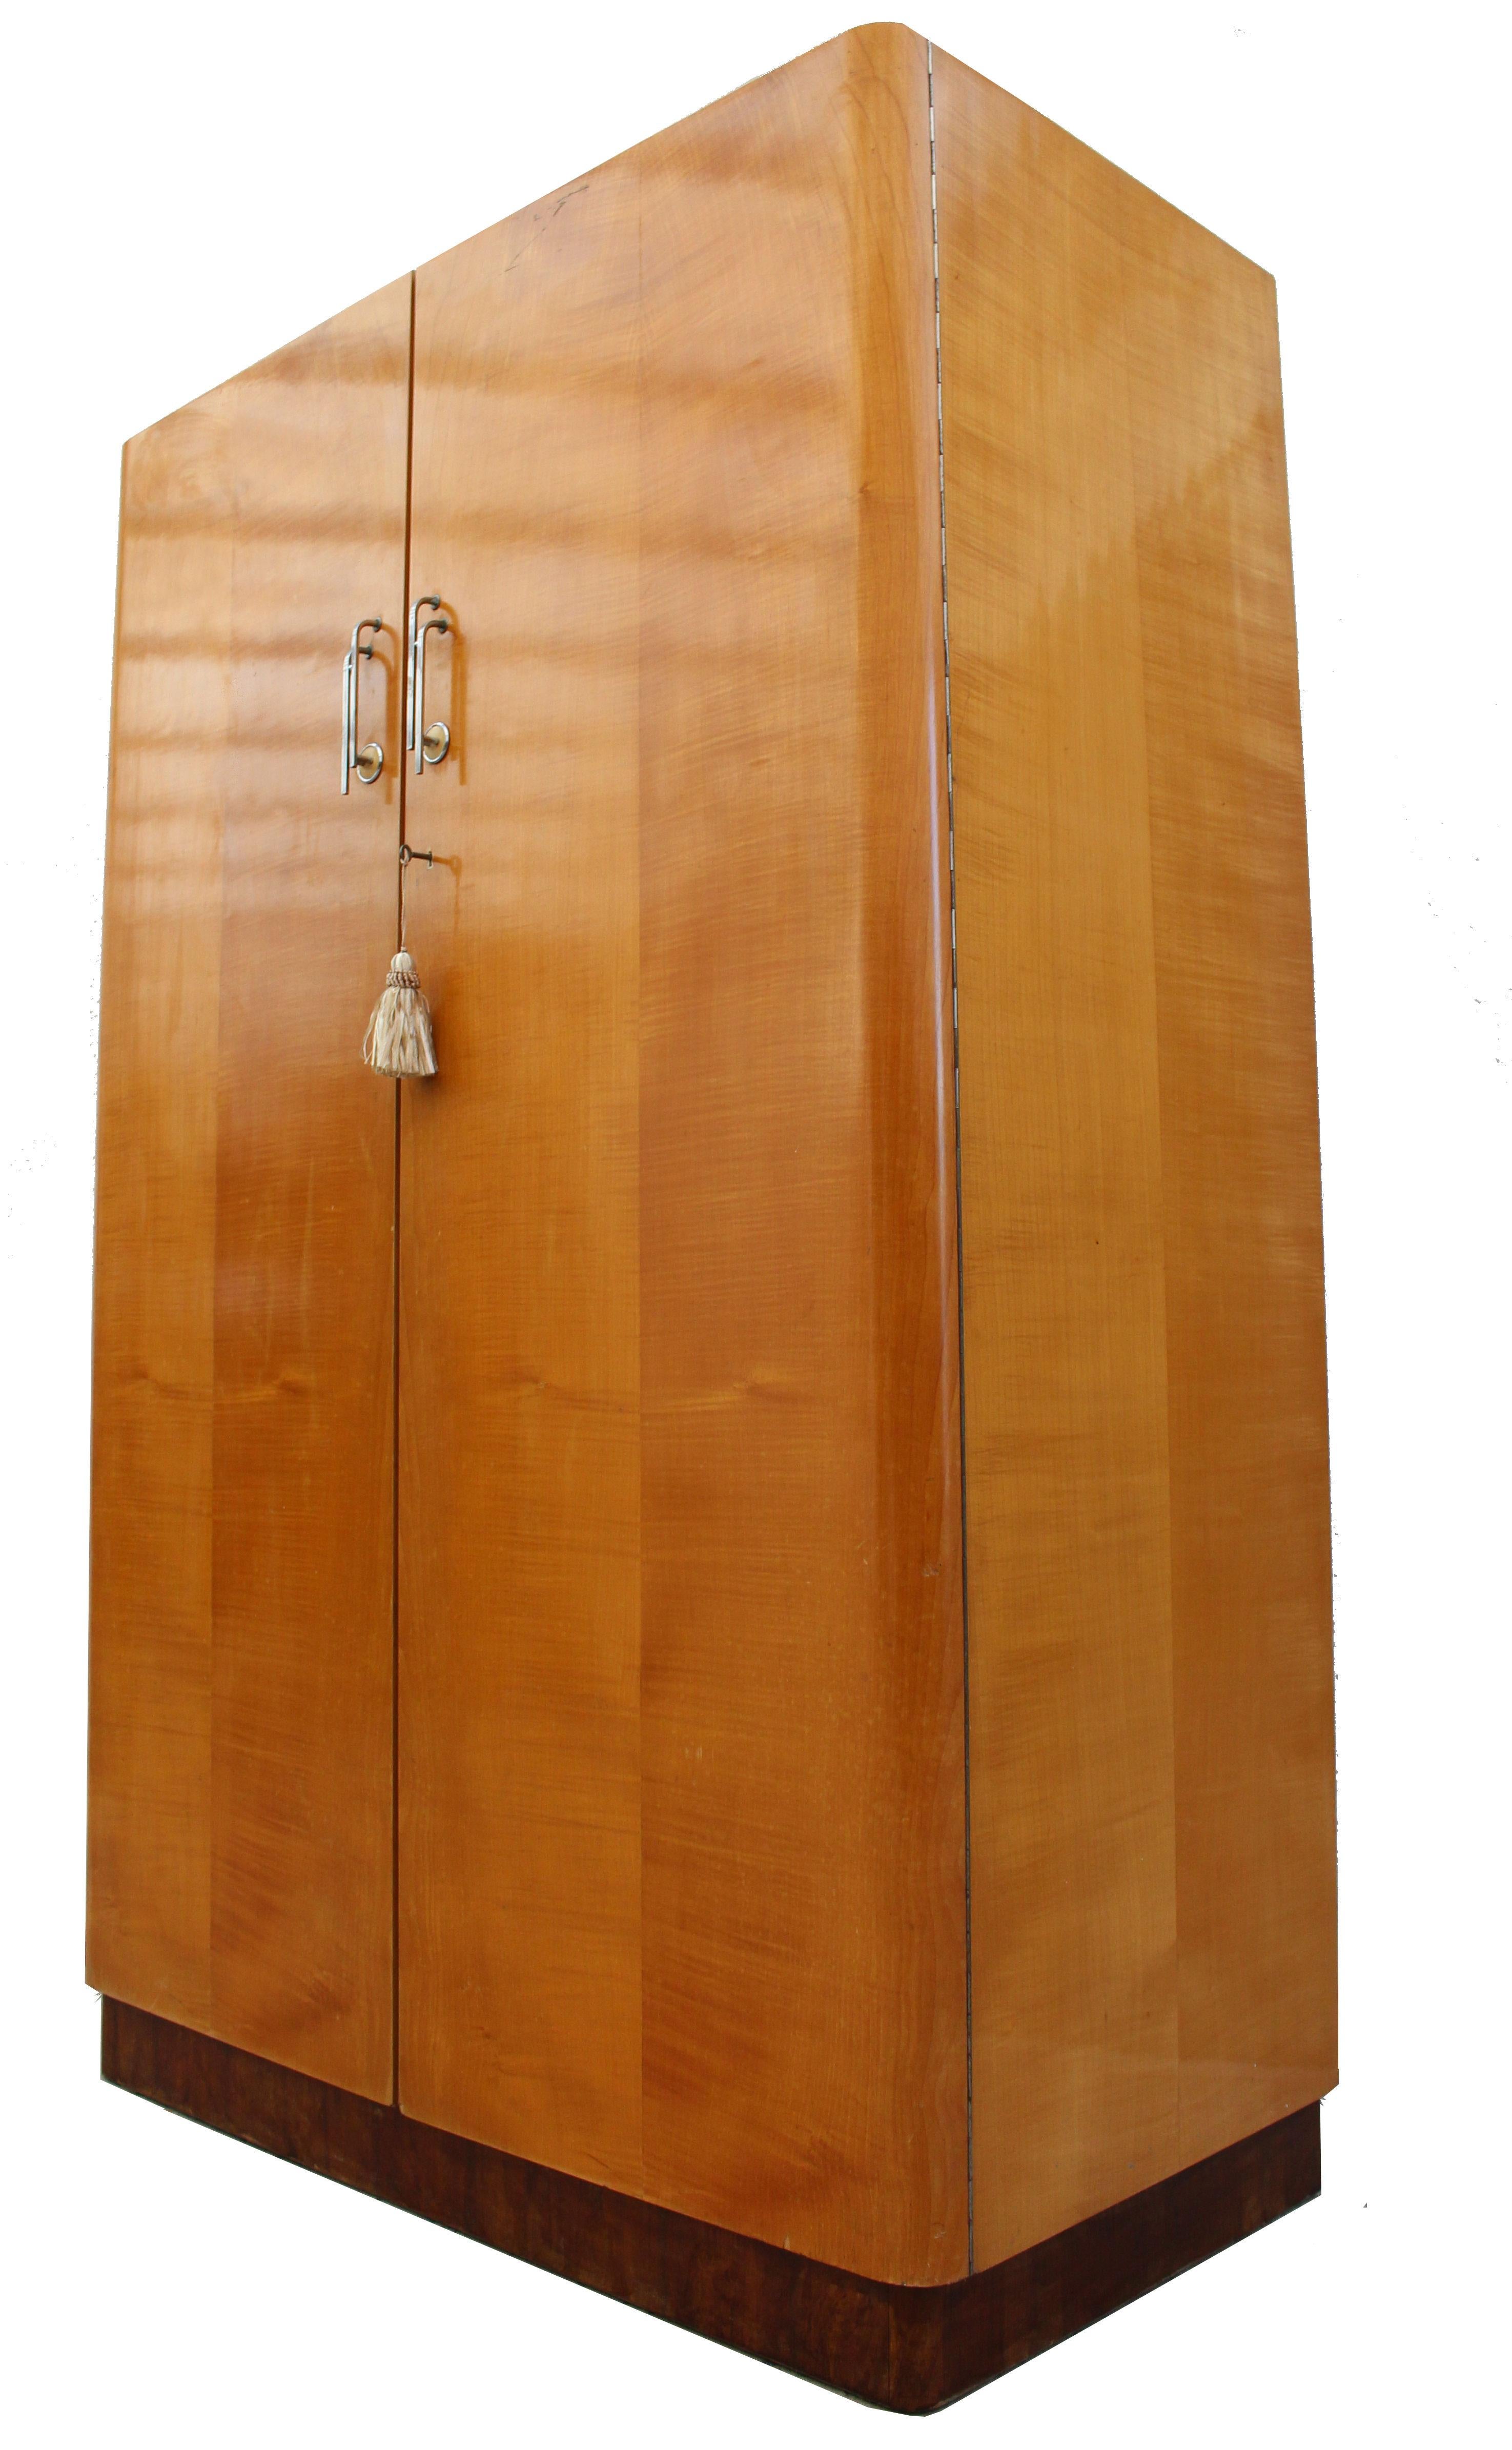 For your consideration is this beautifully styled original Art Deco double wardrobe, English and dating to the 1930s. Features round shouldered doors, all raised on a contrasting darker figured walnut veneered plinth. The doors are book paged and